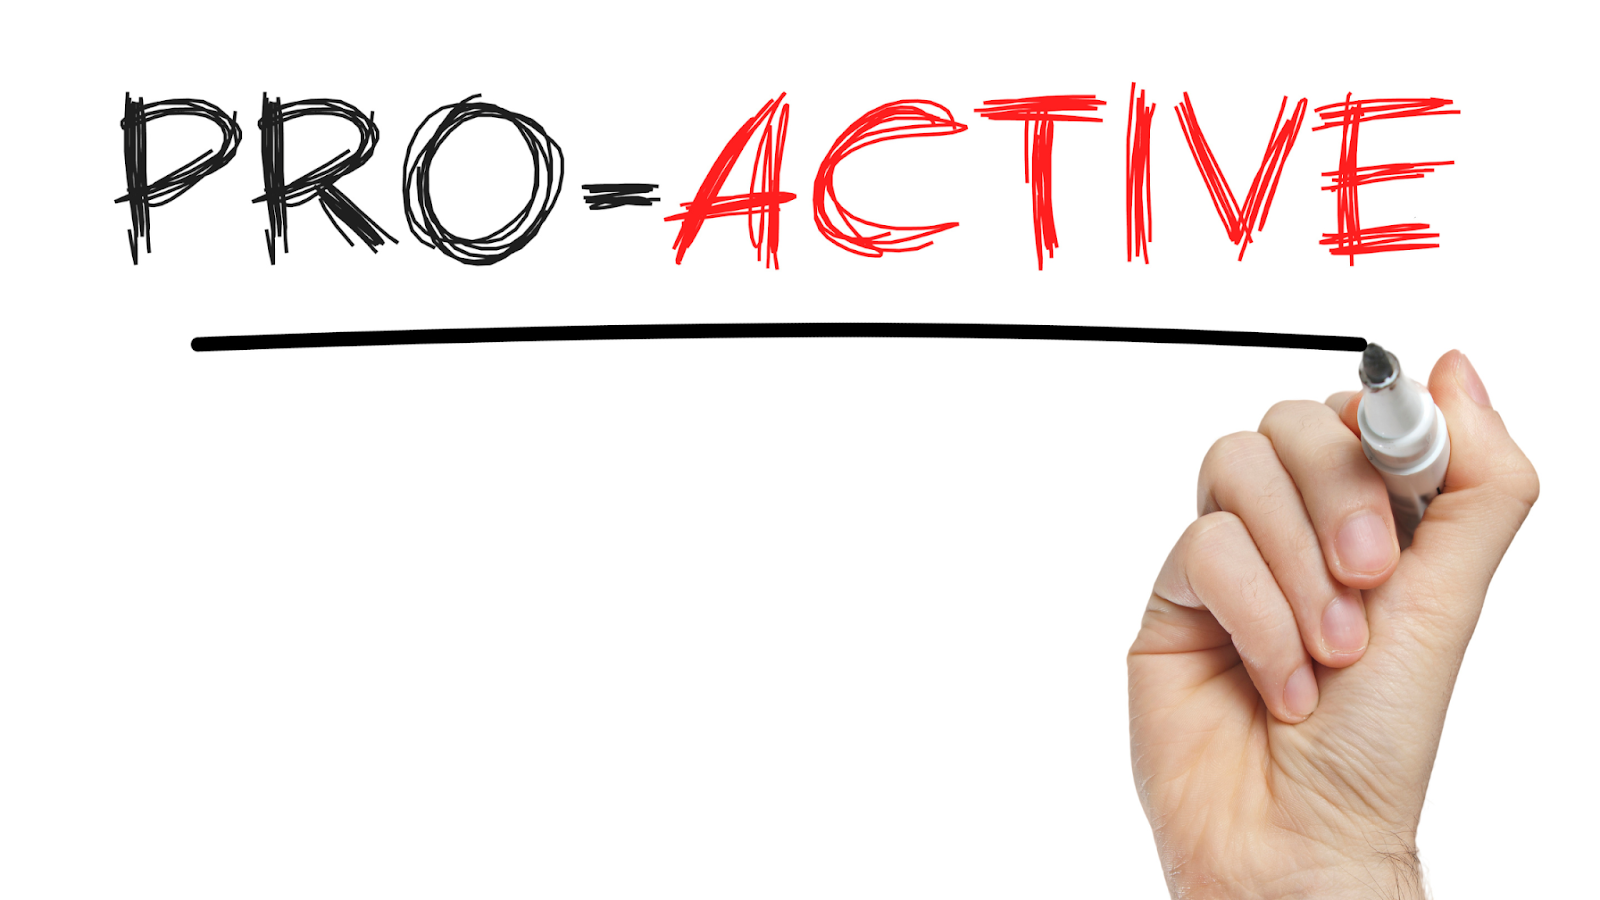 Be pro-active